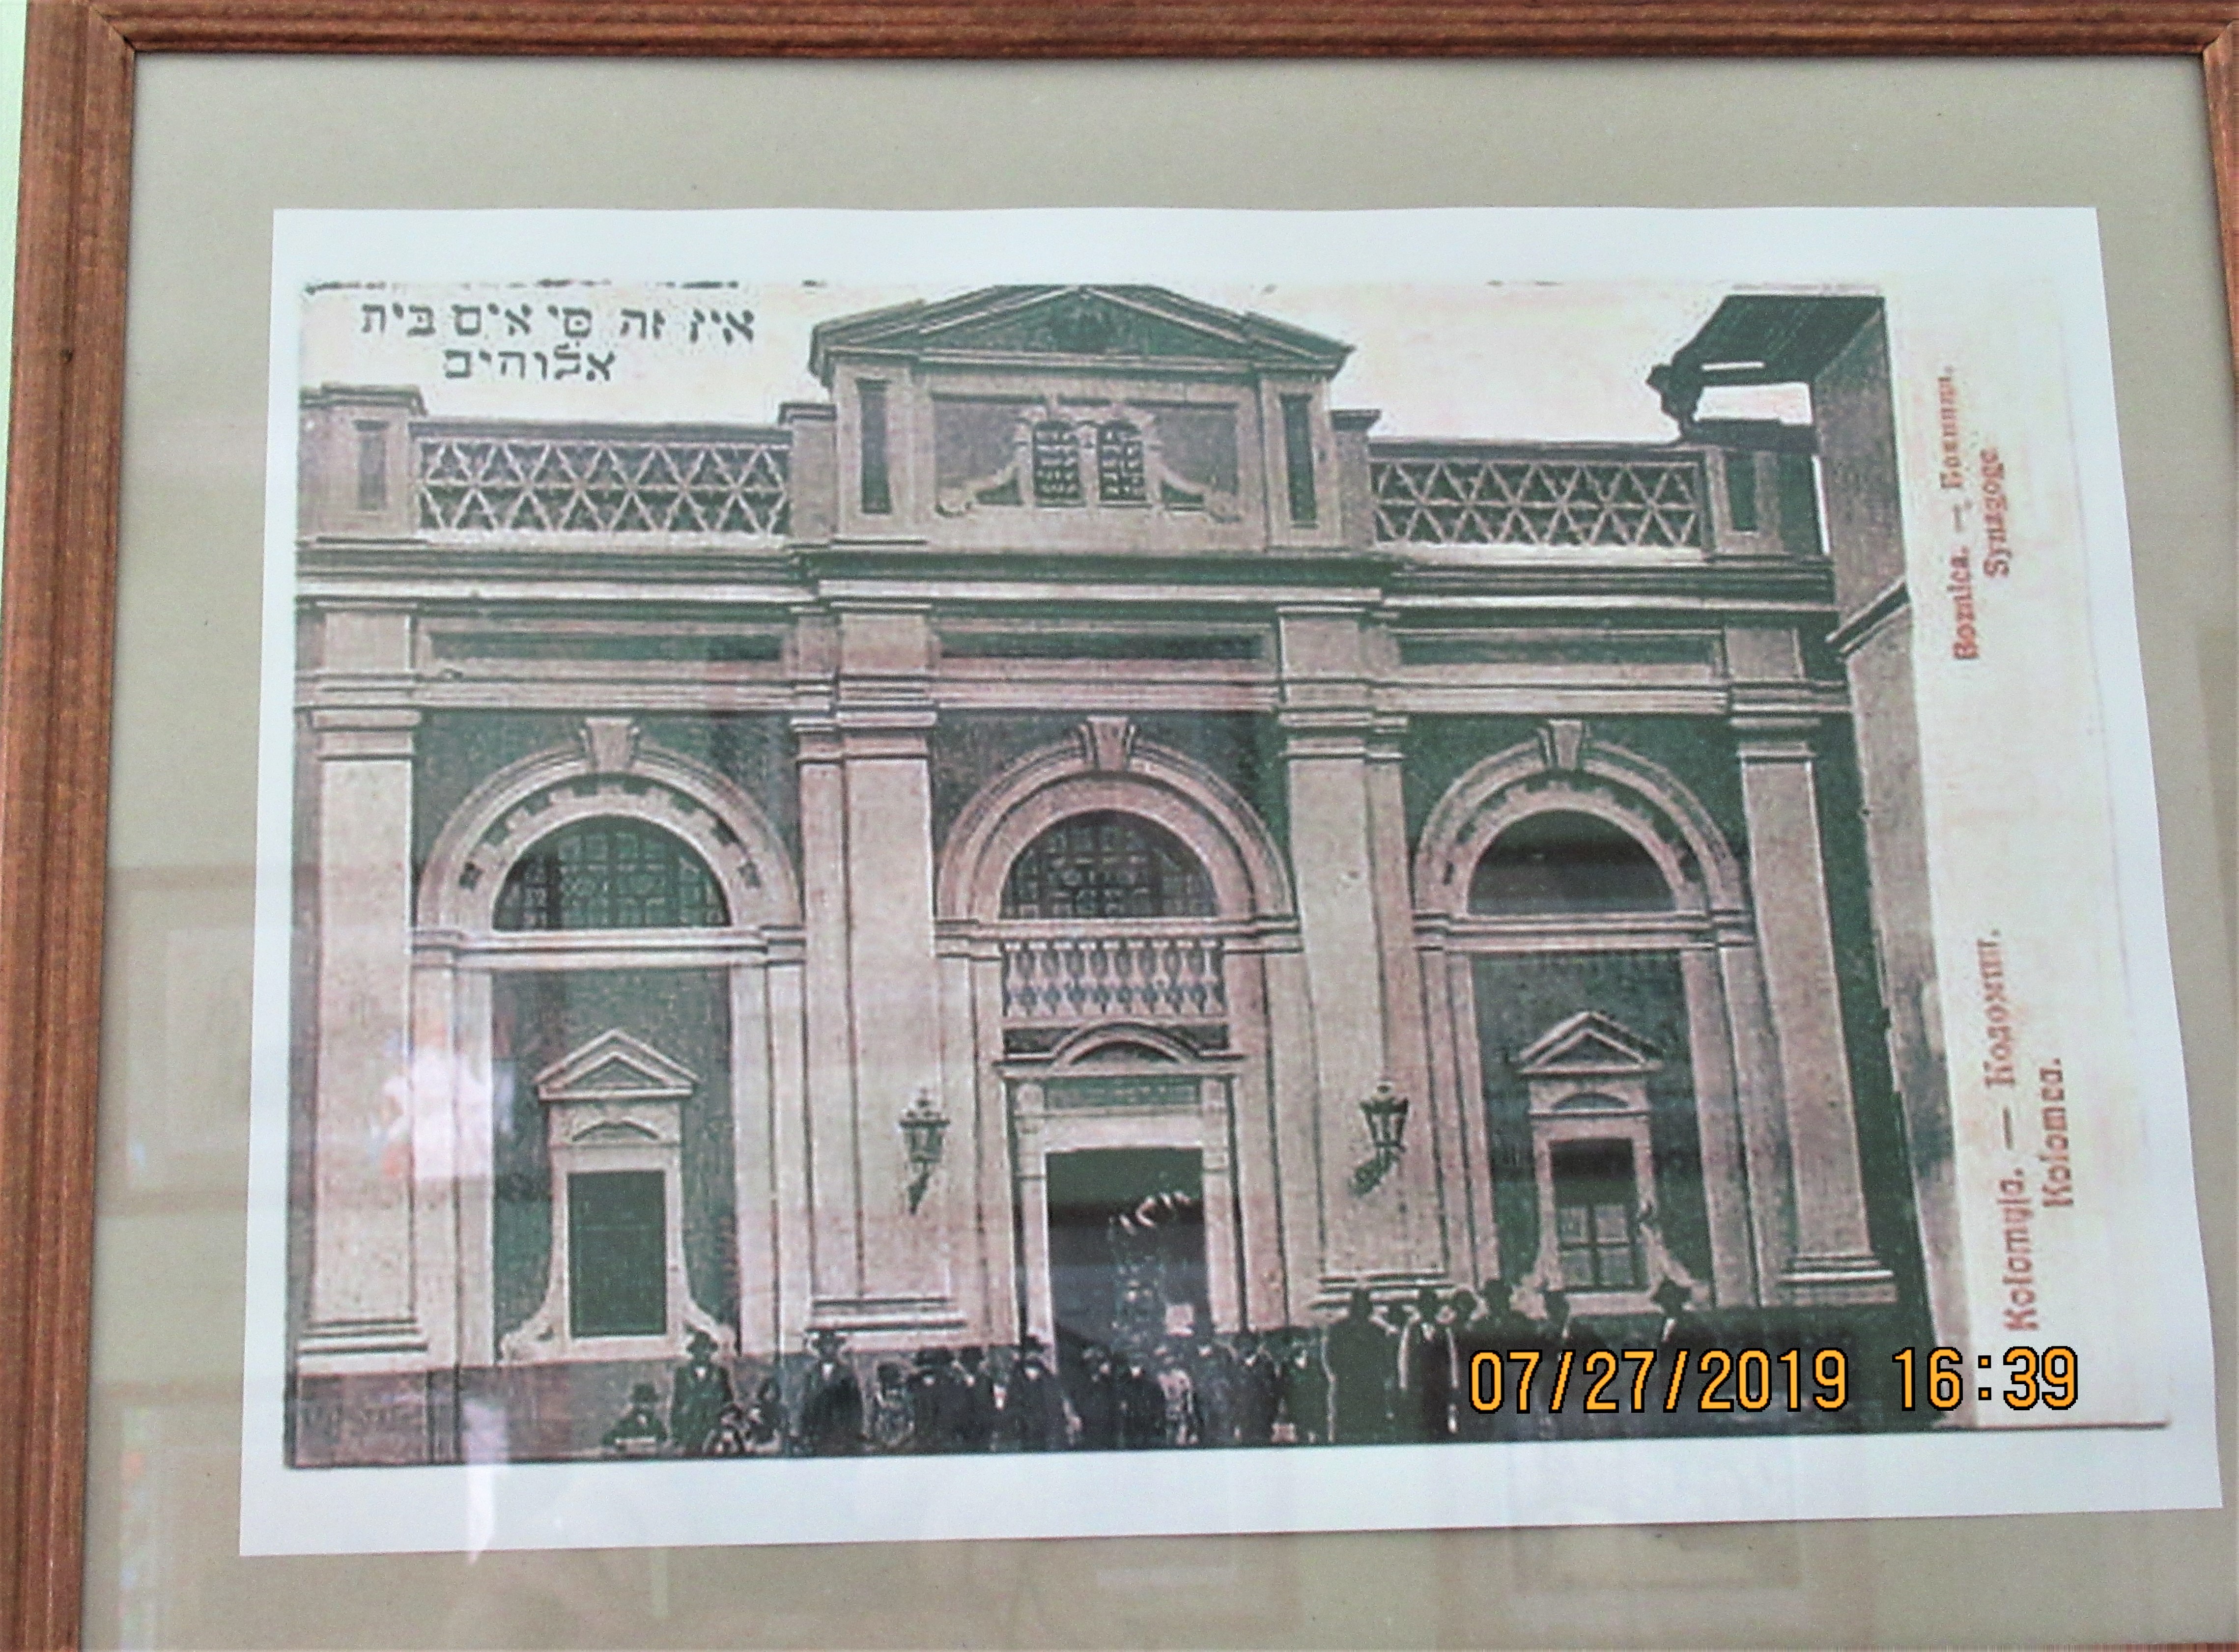 Picture of the Great Synagogue